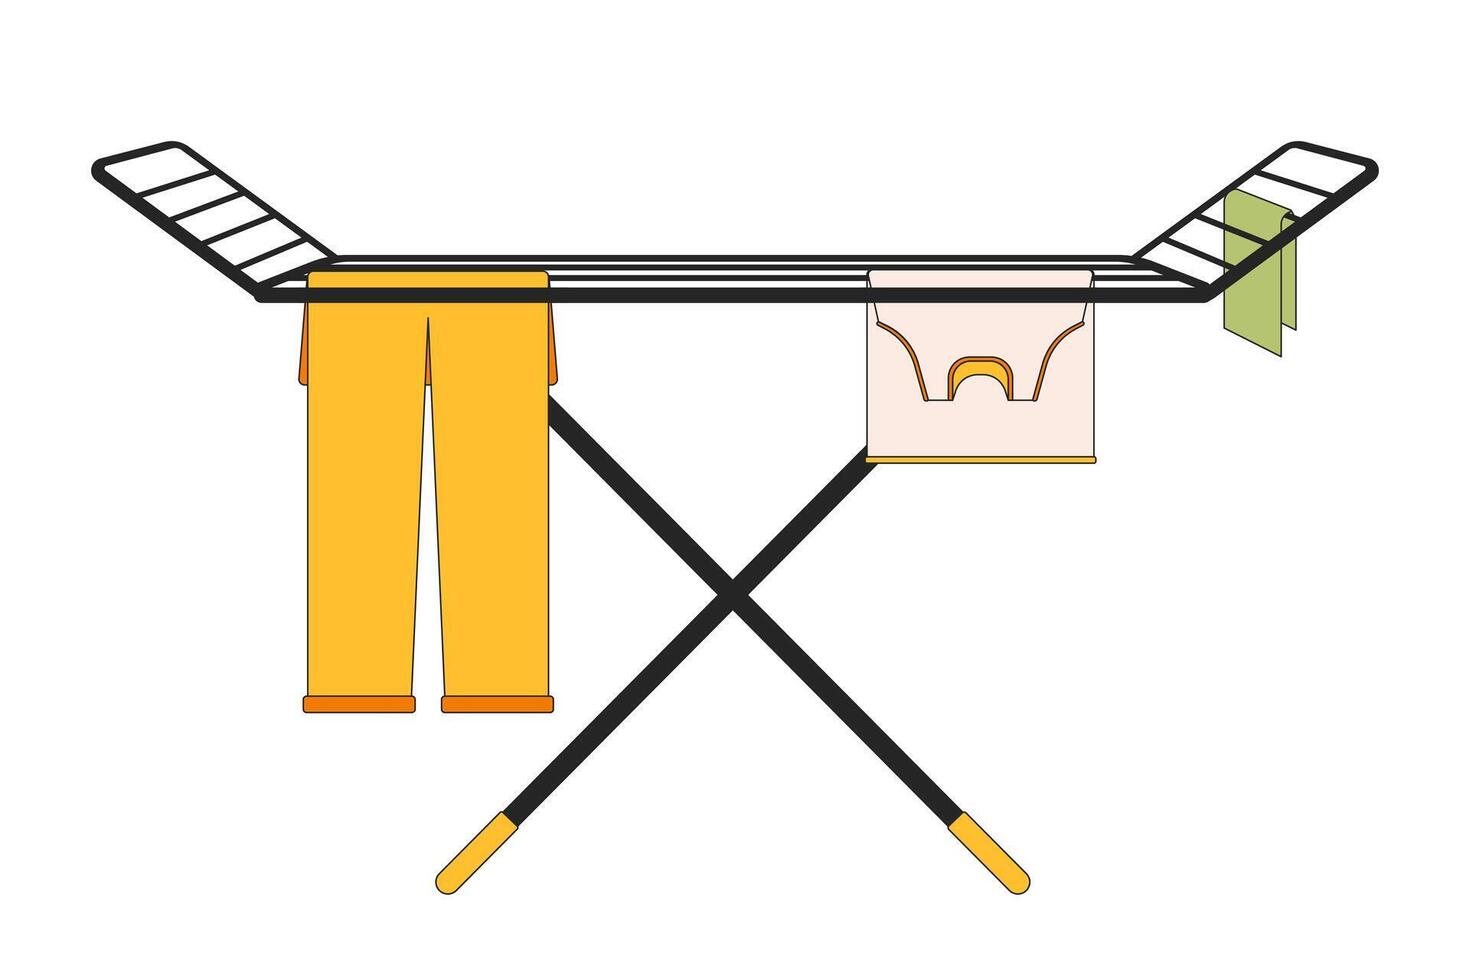 Air dry clothes rack 2D linear cartoon object. Laundry hanging on rack isolated line vector element white background. Housekeeping chores housework. Air drying clothing color flat spot illustration